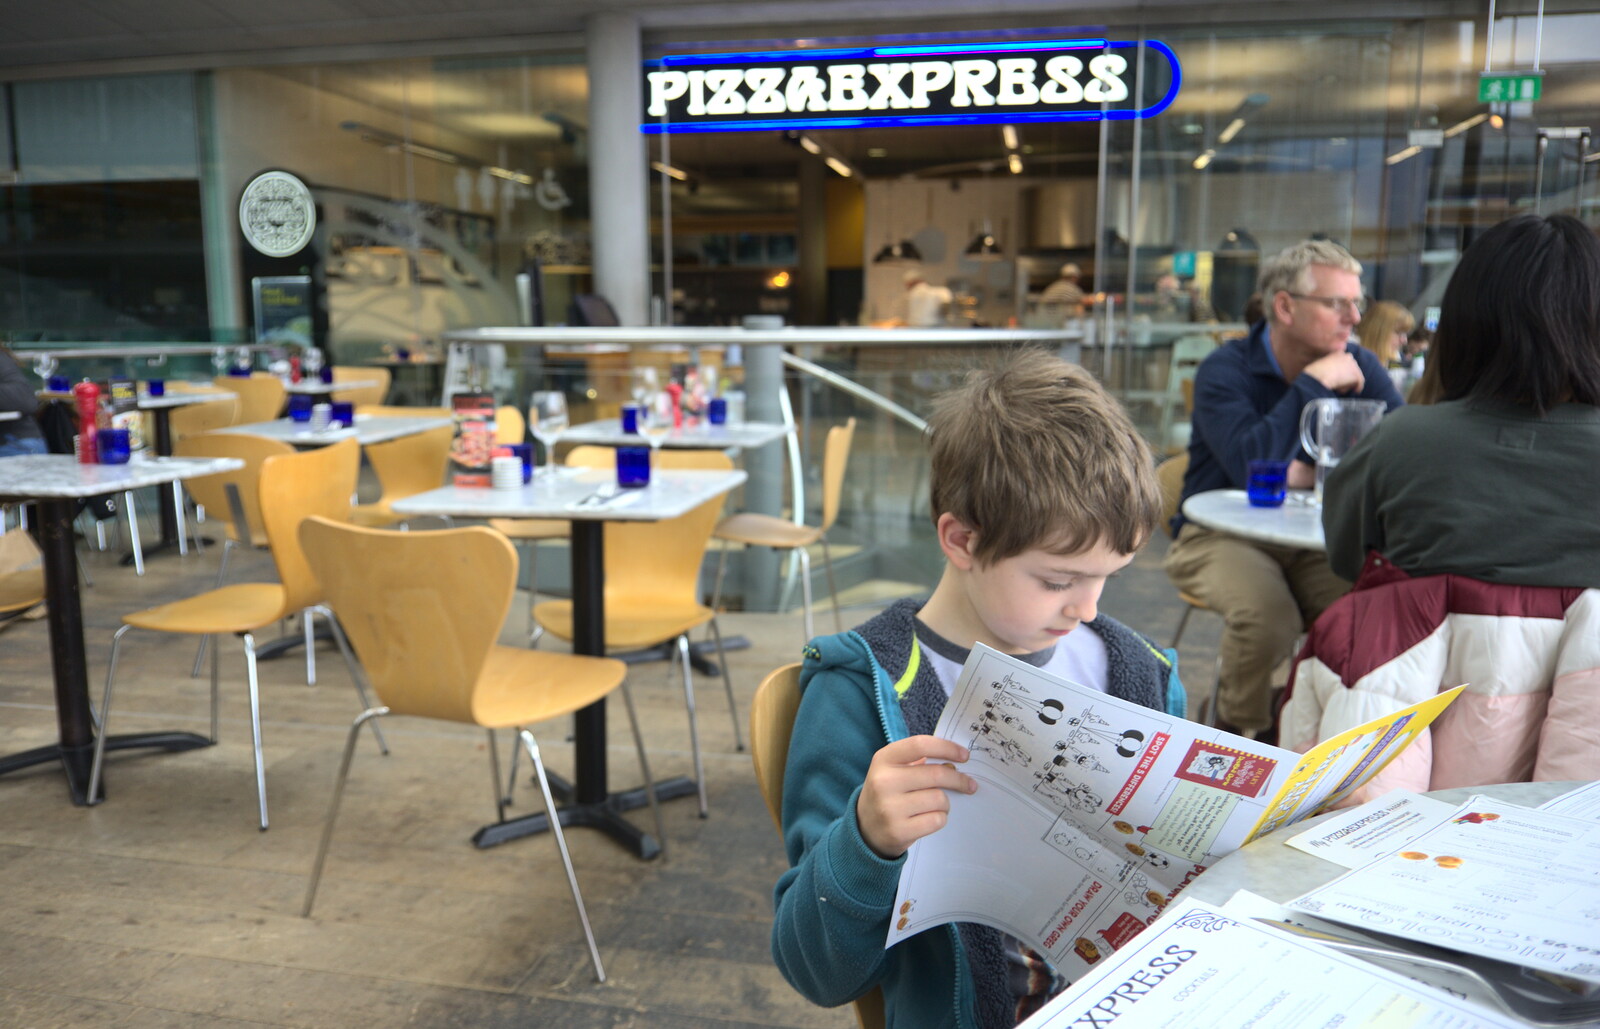 Fred reads the menu in Pizza Express from A Trip to Blickling Hall, Aylsham, Norfolk - 29th April 2018